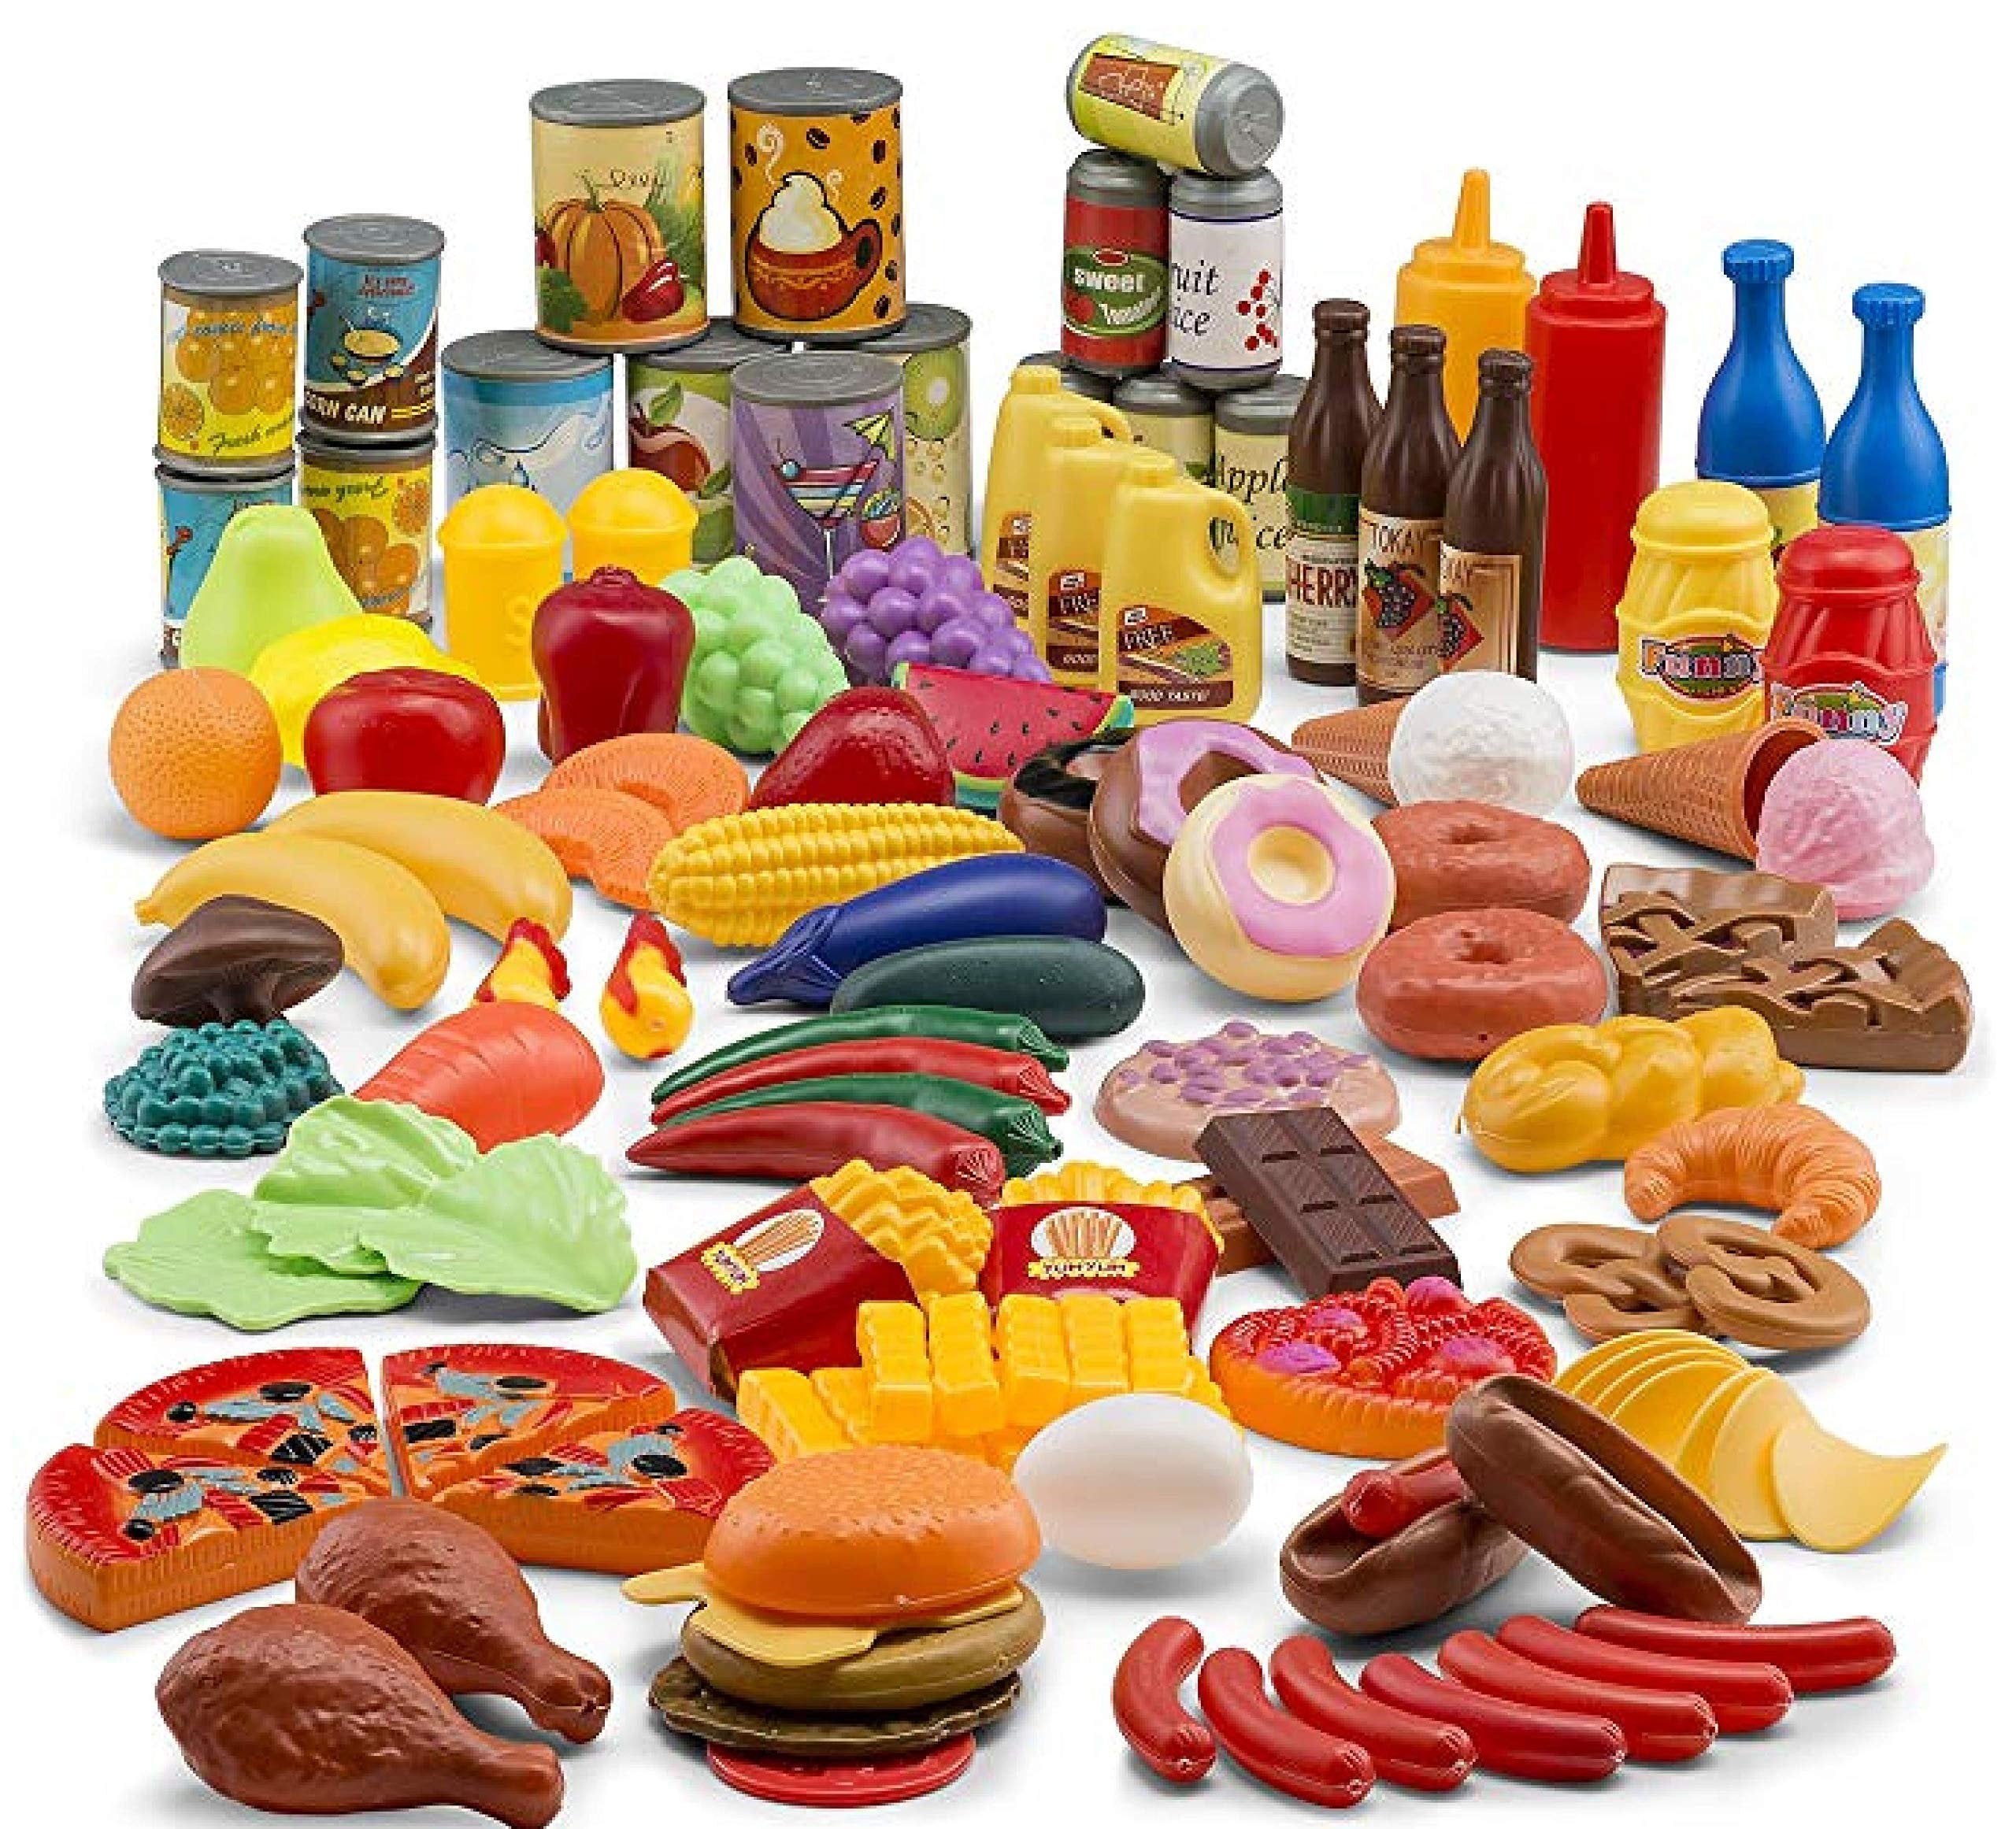 JaxoJoy 122-Piece Deluxe Pretend Play Food Set | Toy Food Assortment Playset for Kids & Toddlers | Pretend Play Food Sets for Kids Kitchen | Kitchen Toys | Play Kitchen Accessories